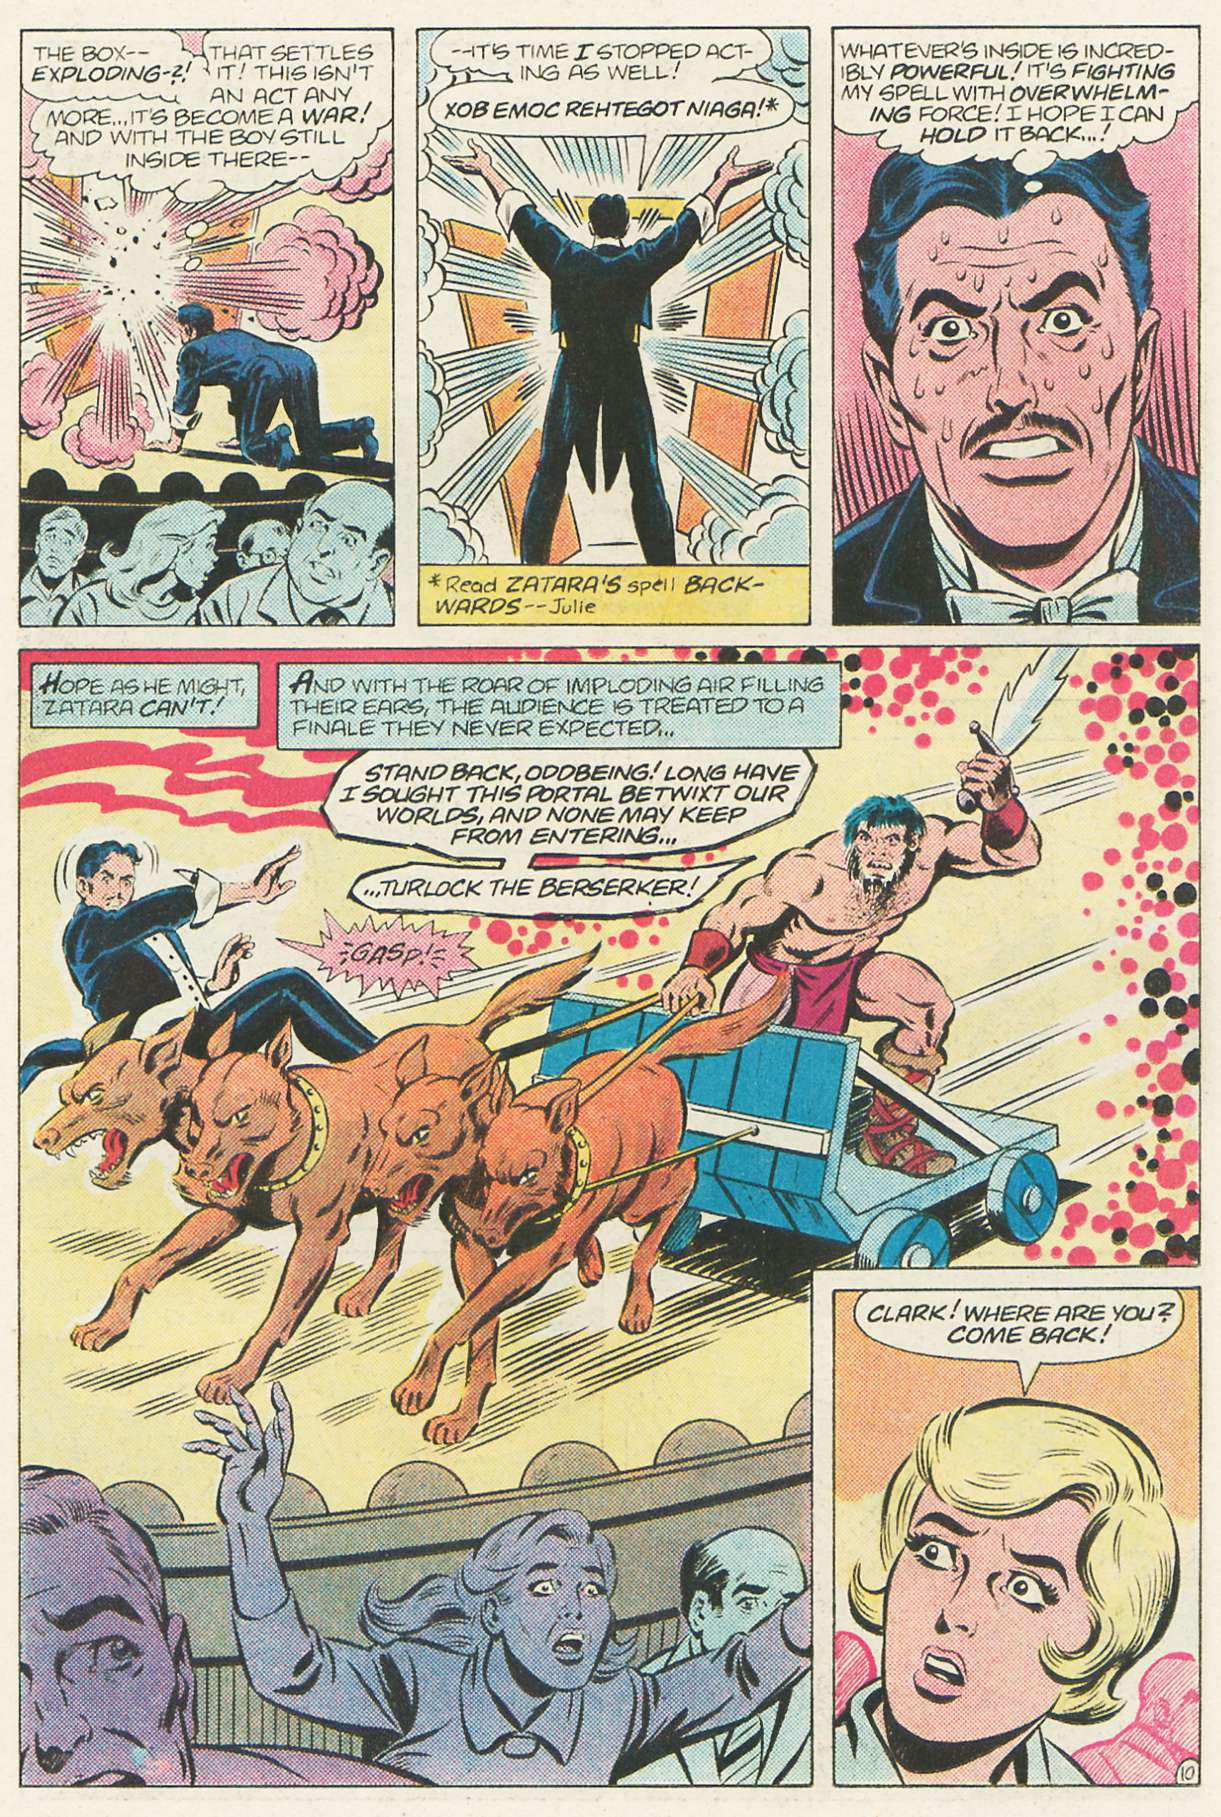 The New Adventures of Superboy 49 Page 10